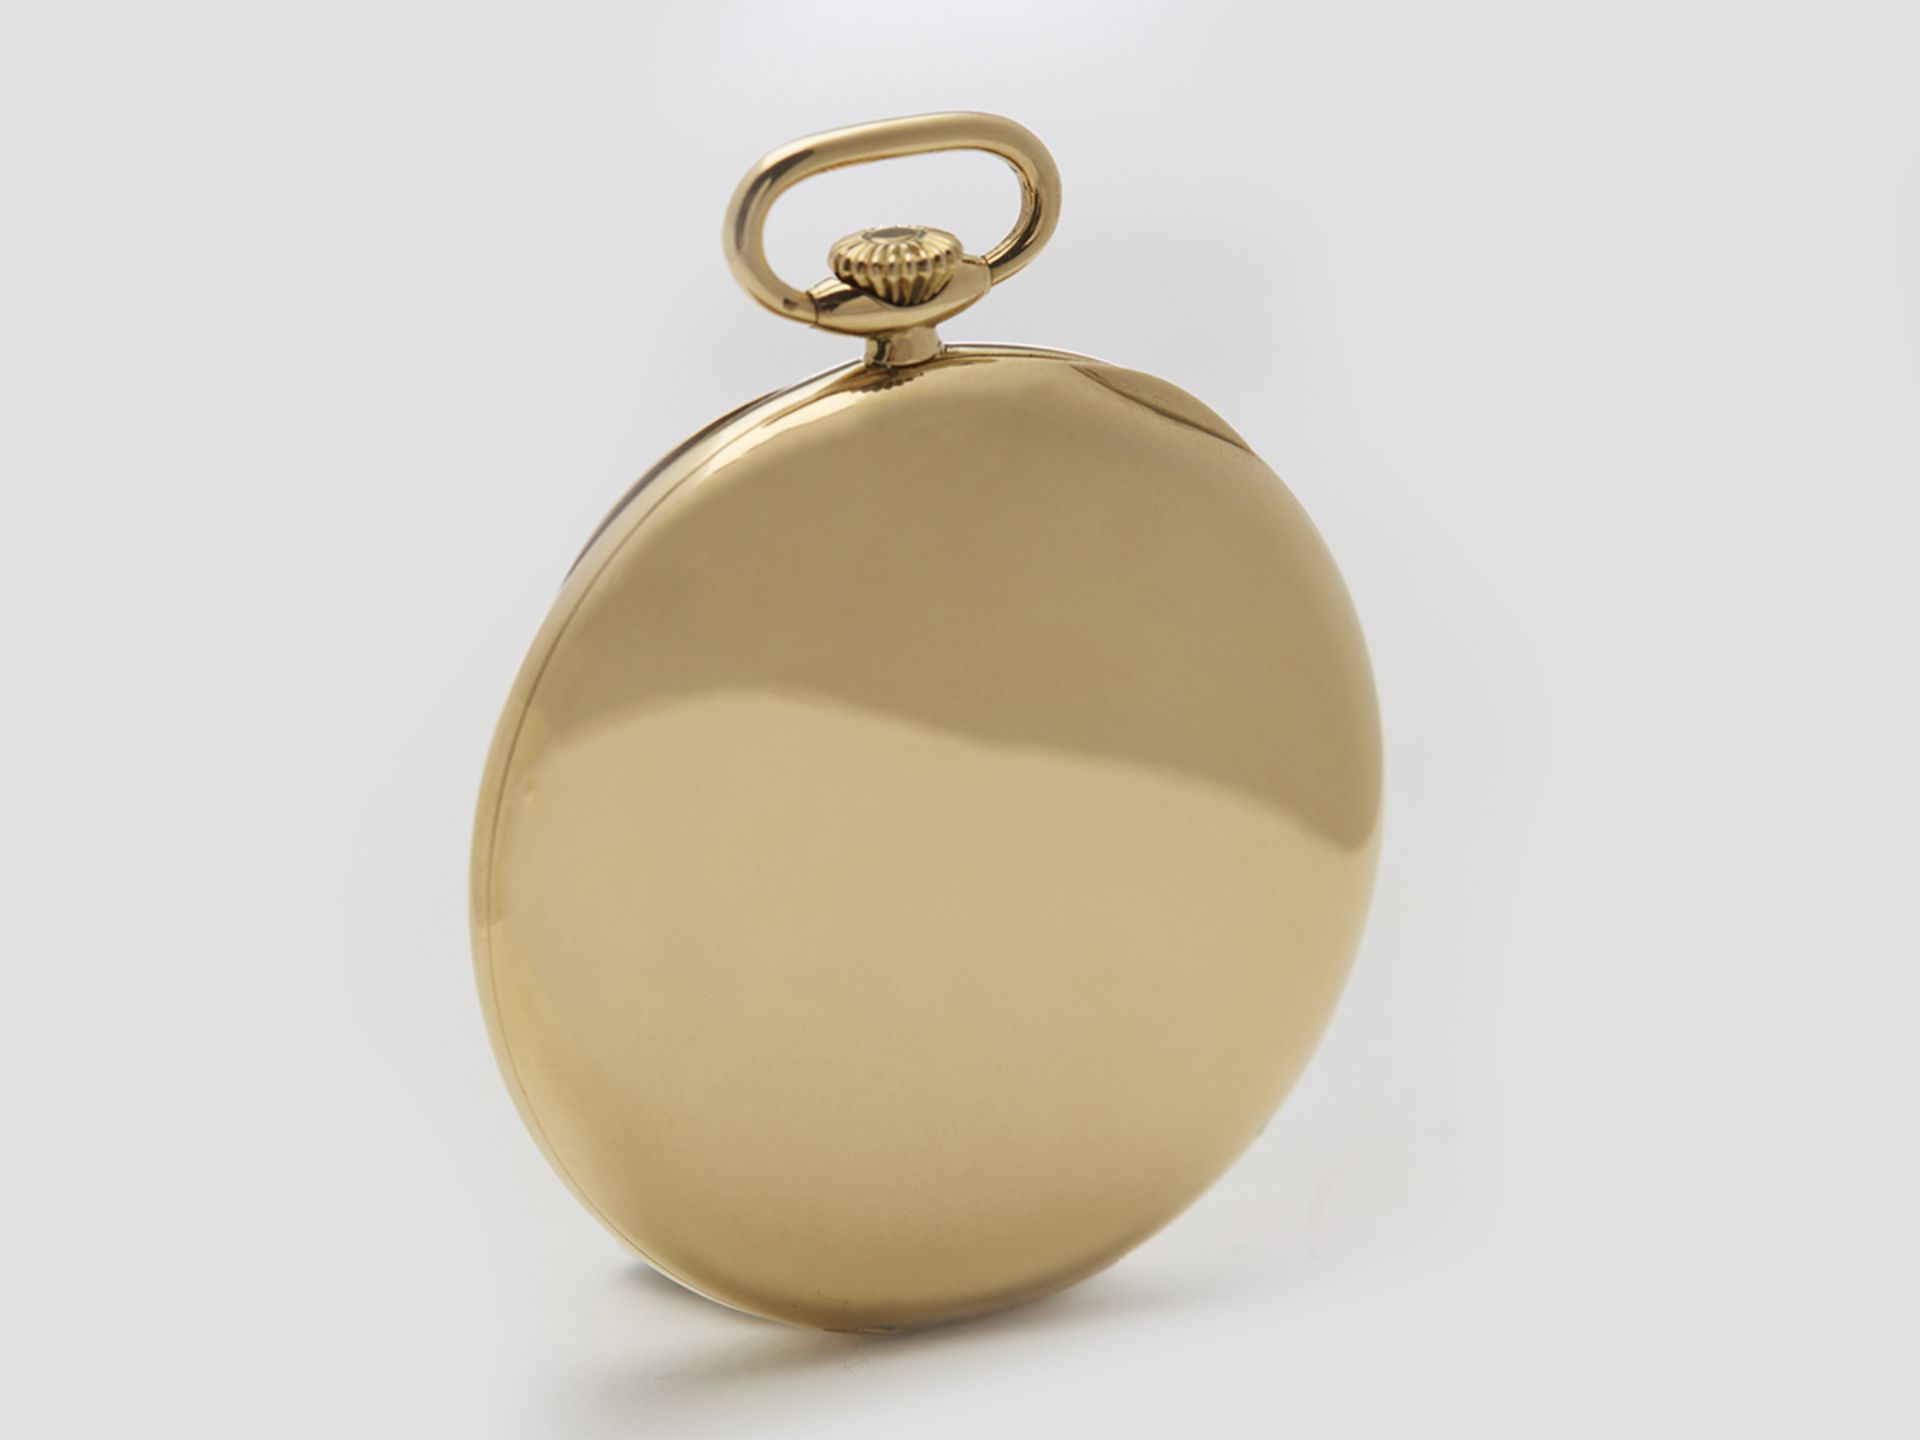 IWC Vintage Turler Pocket Watch 45mm 18k Yellow Gold - Image 3 of 5